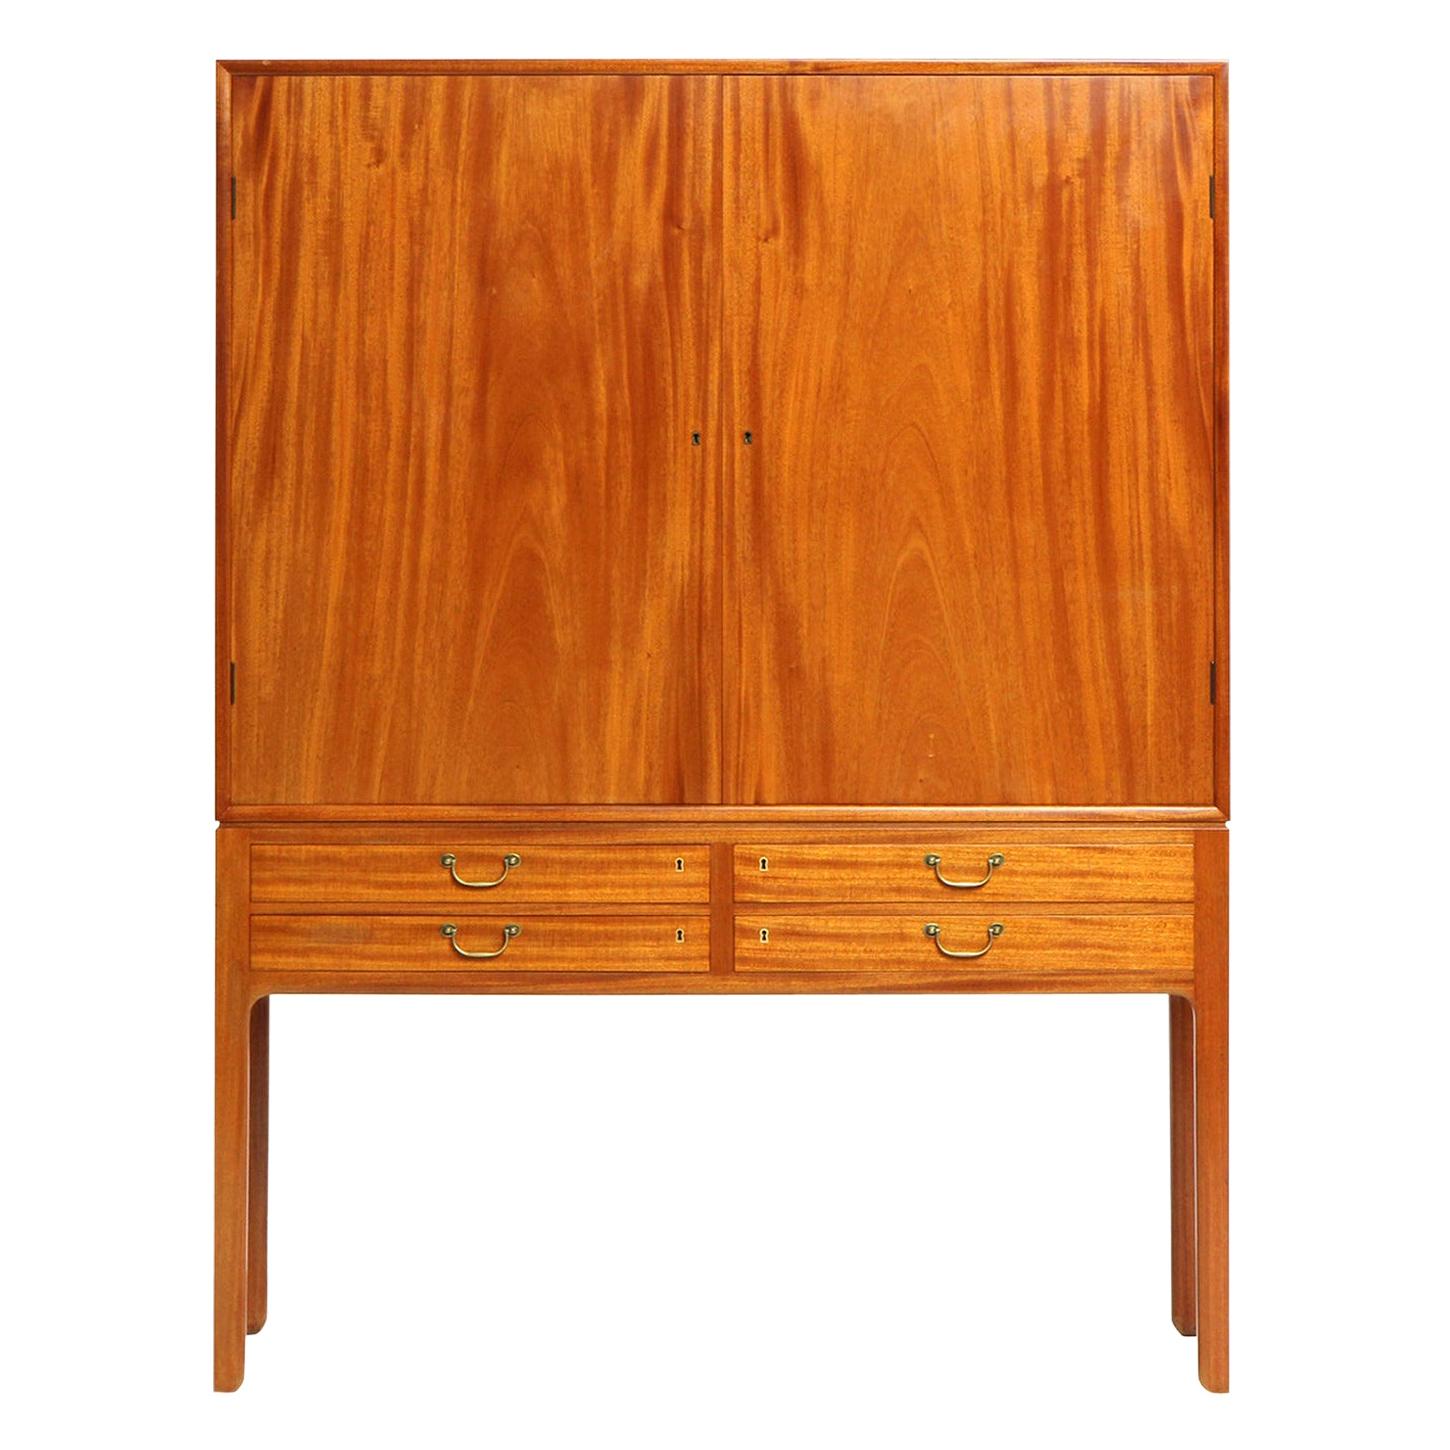 1940s Danish Mahogany Cabinet by Ole Wanscher for A.J. Iversen